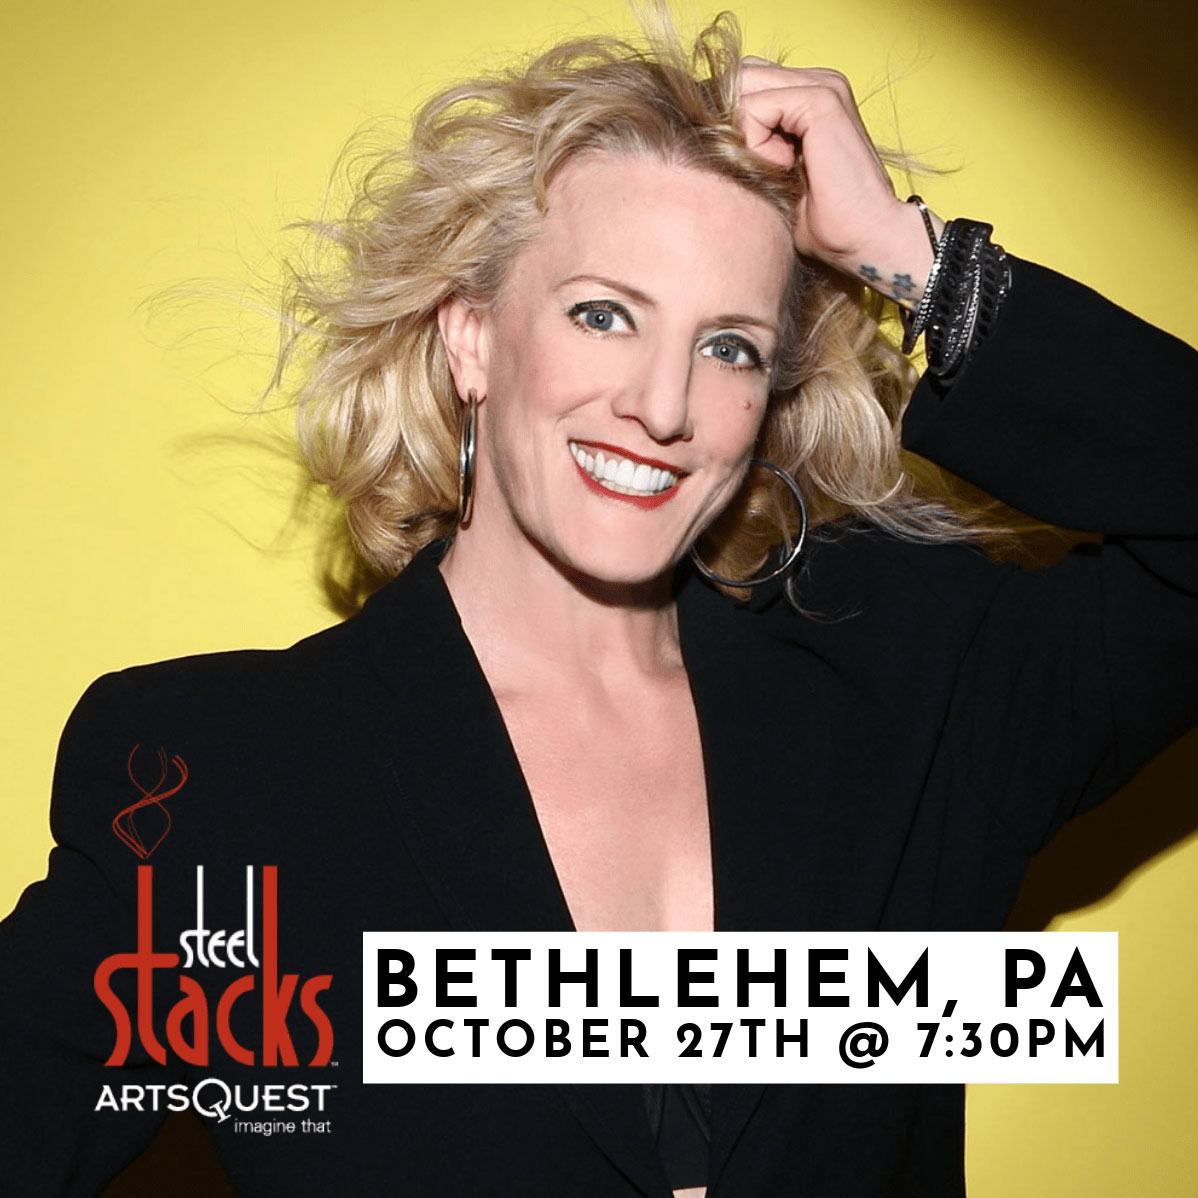 Suzanne Westenhoefer performing at Steel Stacks in Bethlehem, PA on 10/27 at 7:30pm